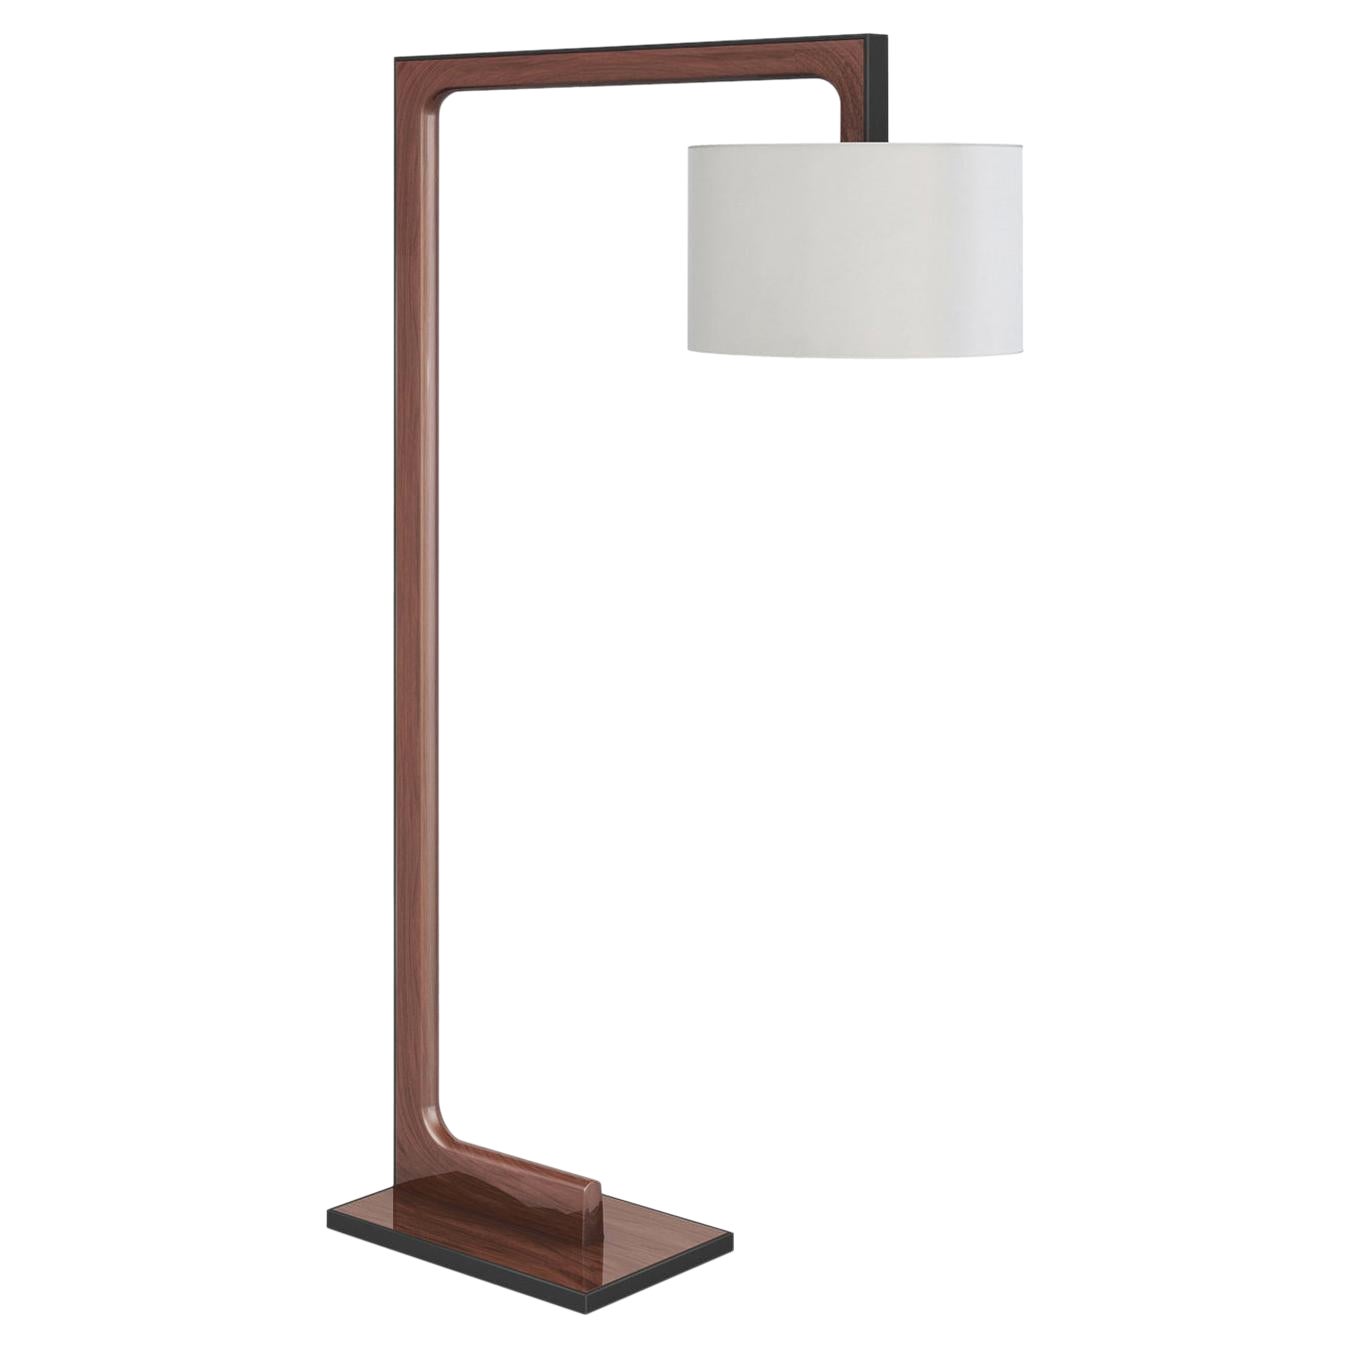 Lena Floor Lamp with Paper Shade by LK Edition